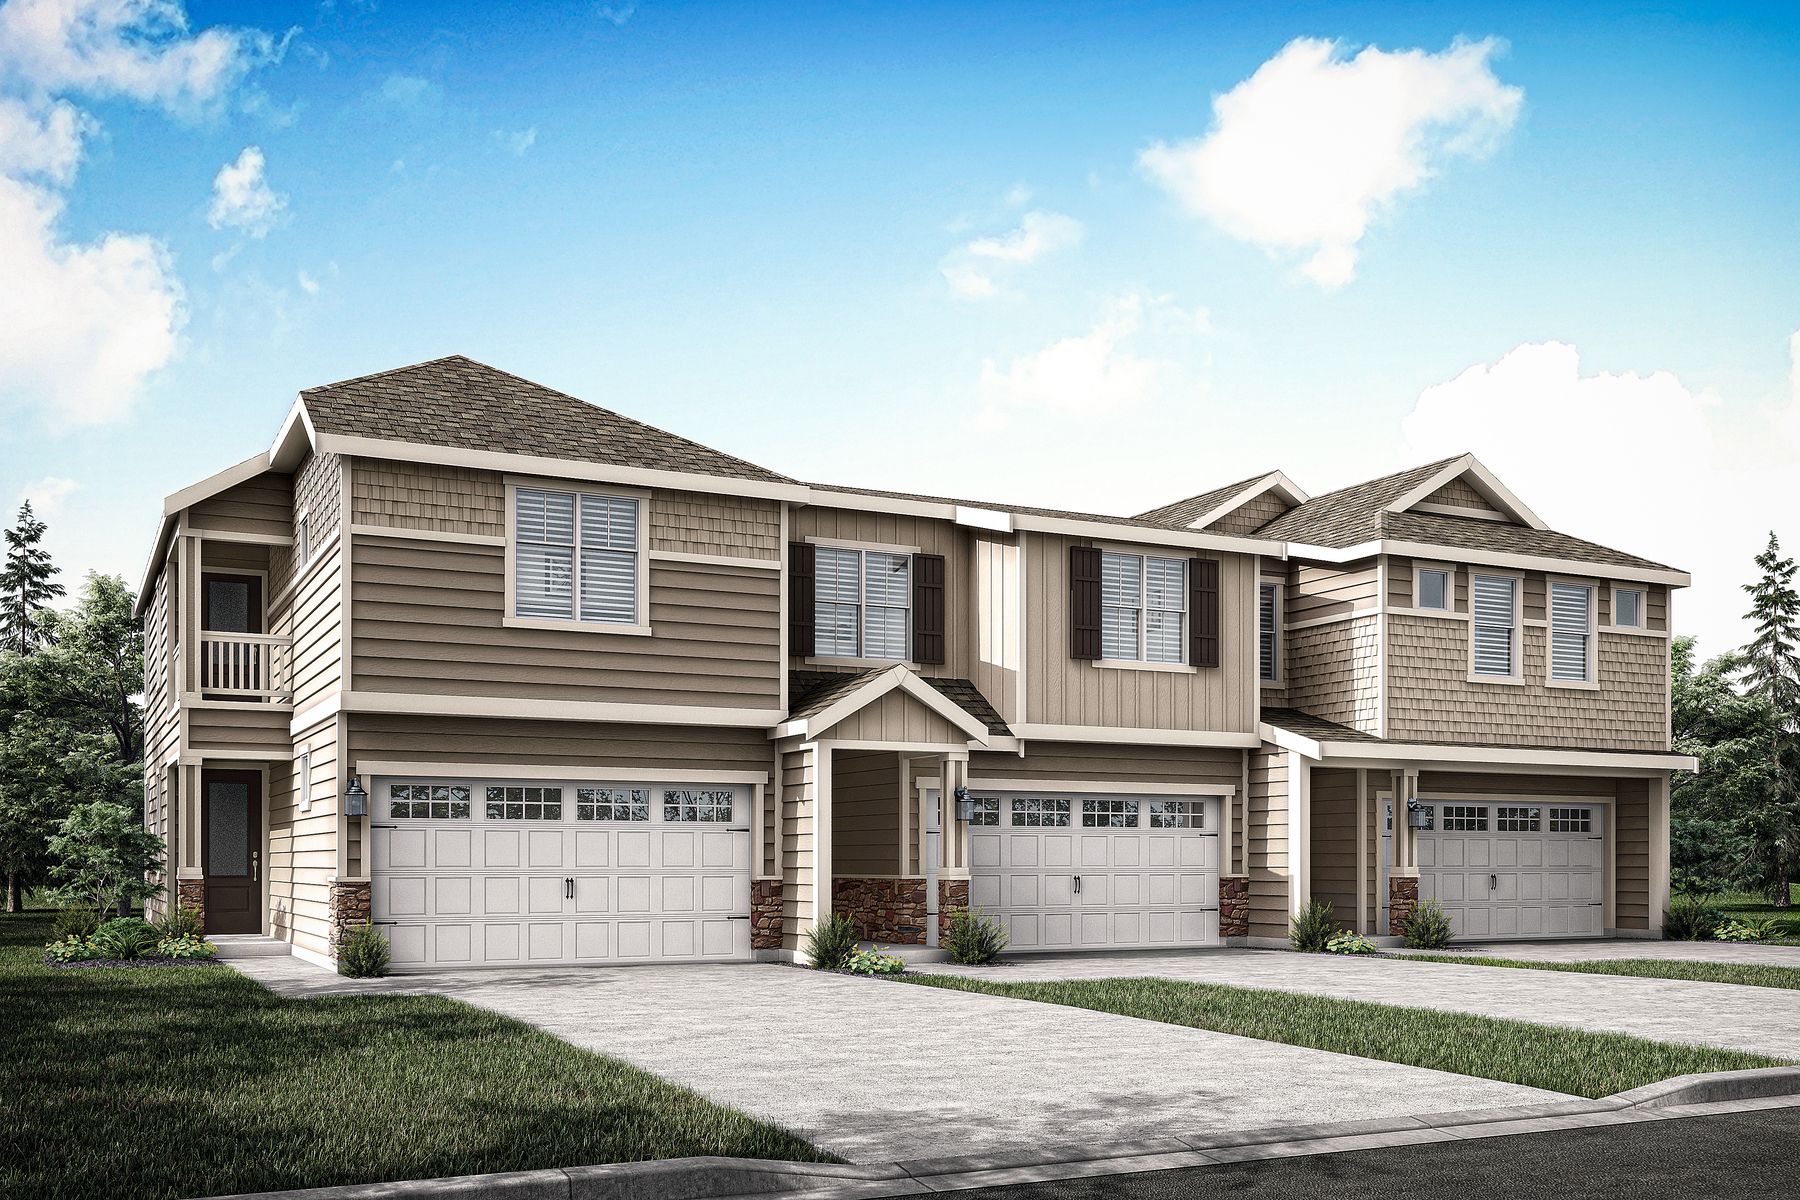 The Village at Whiskey Ridge by LGI Homes:At The Village at Whiskey Ridge, find a variety of homes with spacious interiors and designer finishes.